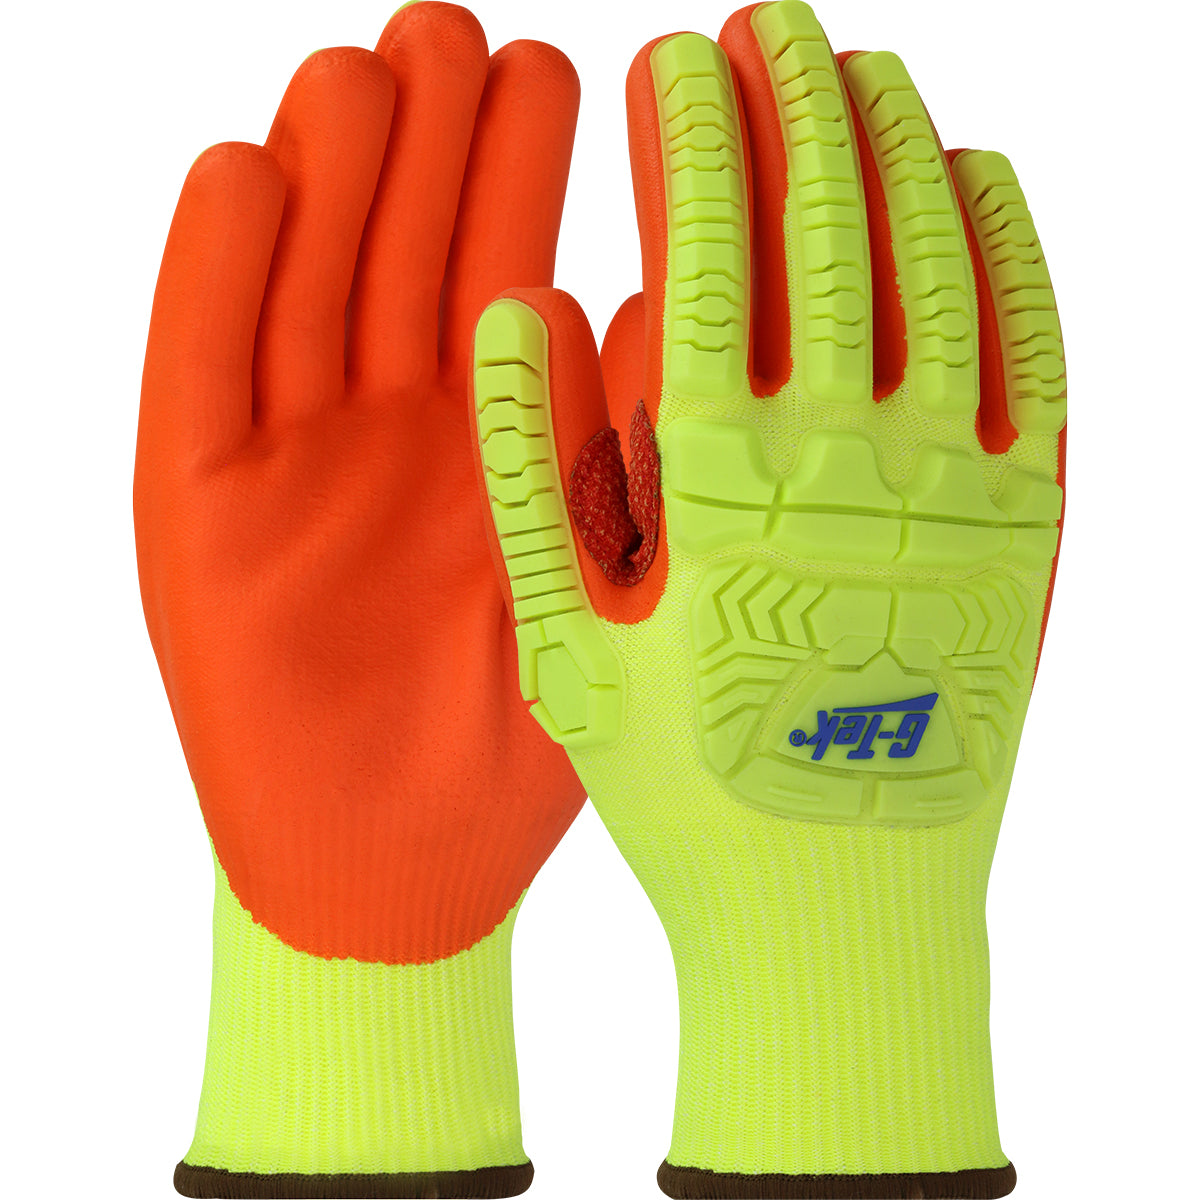 G-Tek® PolyKor® Glove with Hi-Vis Impact Protection and Nitrile Foam Coated Palm & Fingers